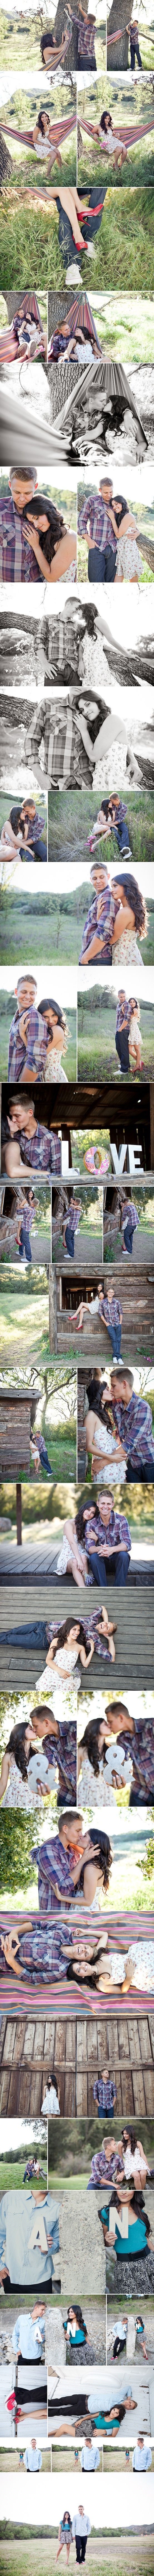 I love everything about these engagement pictures.